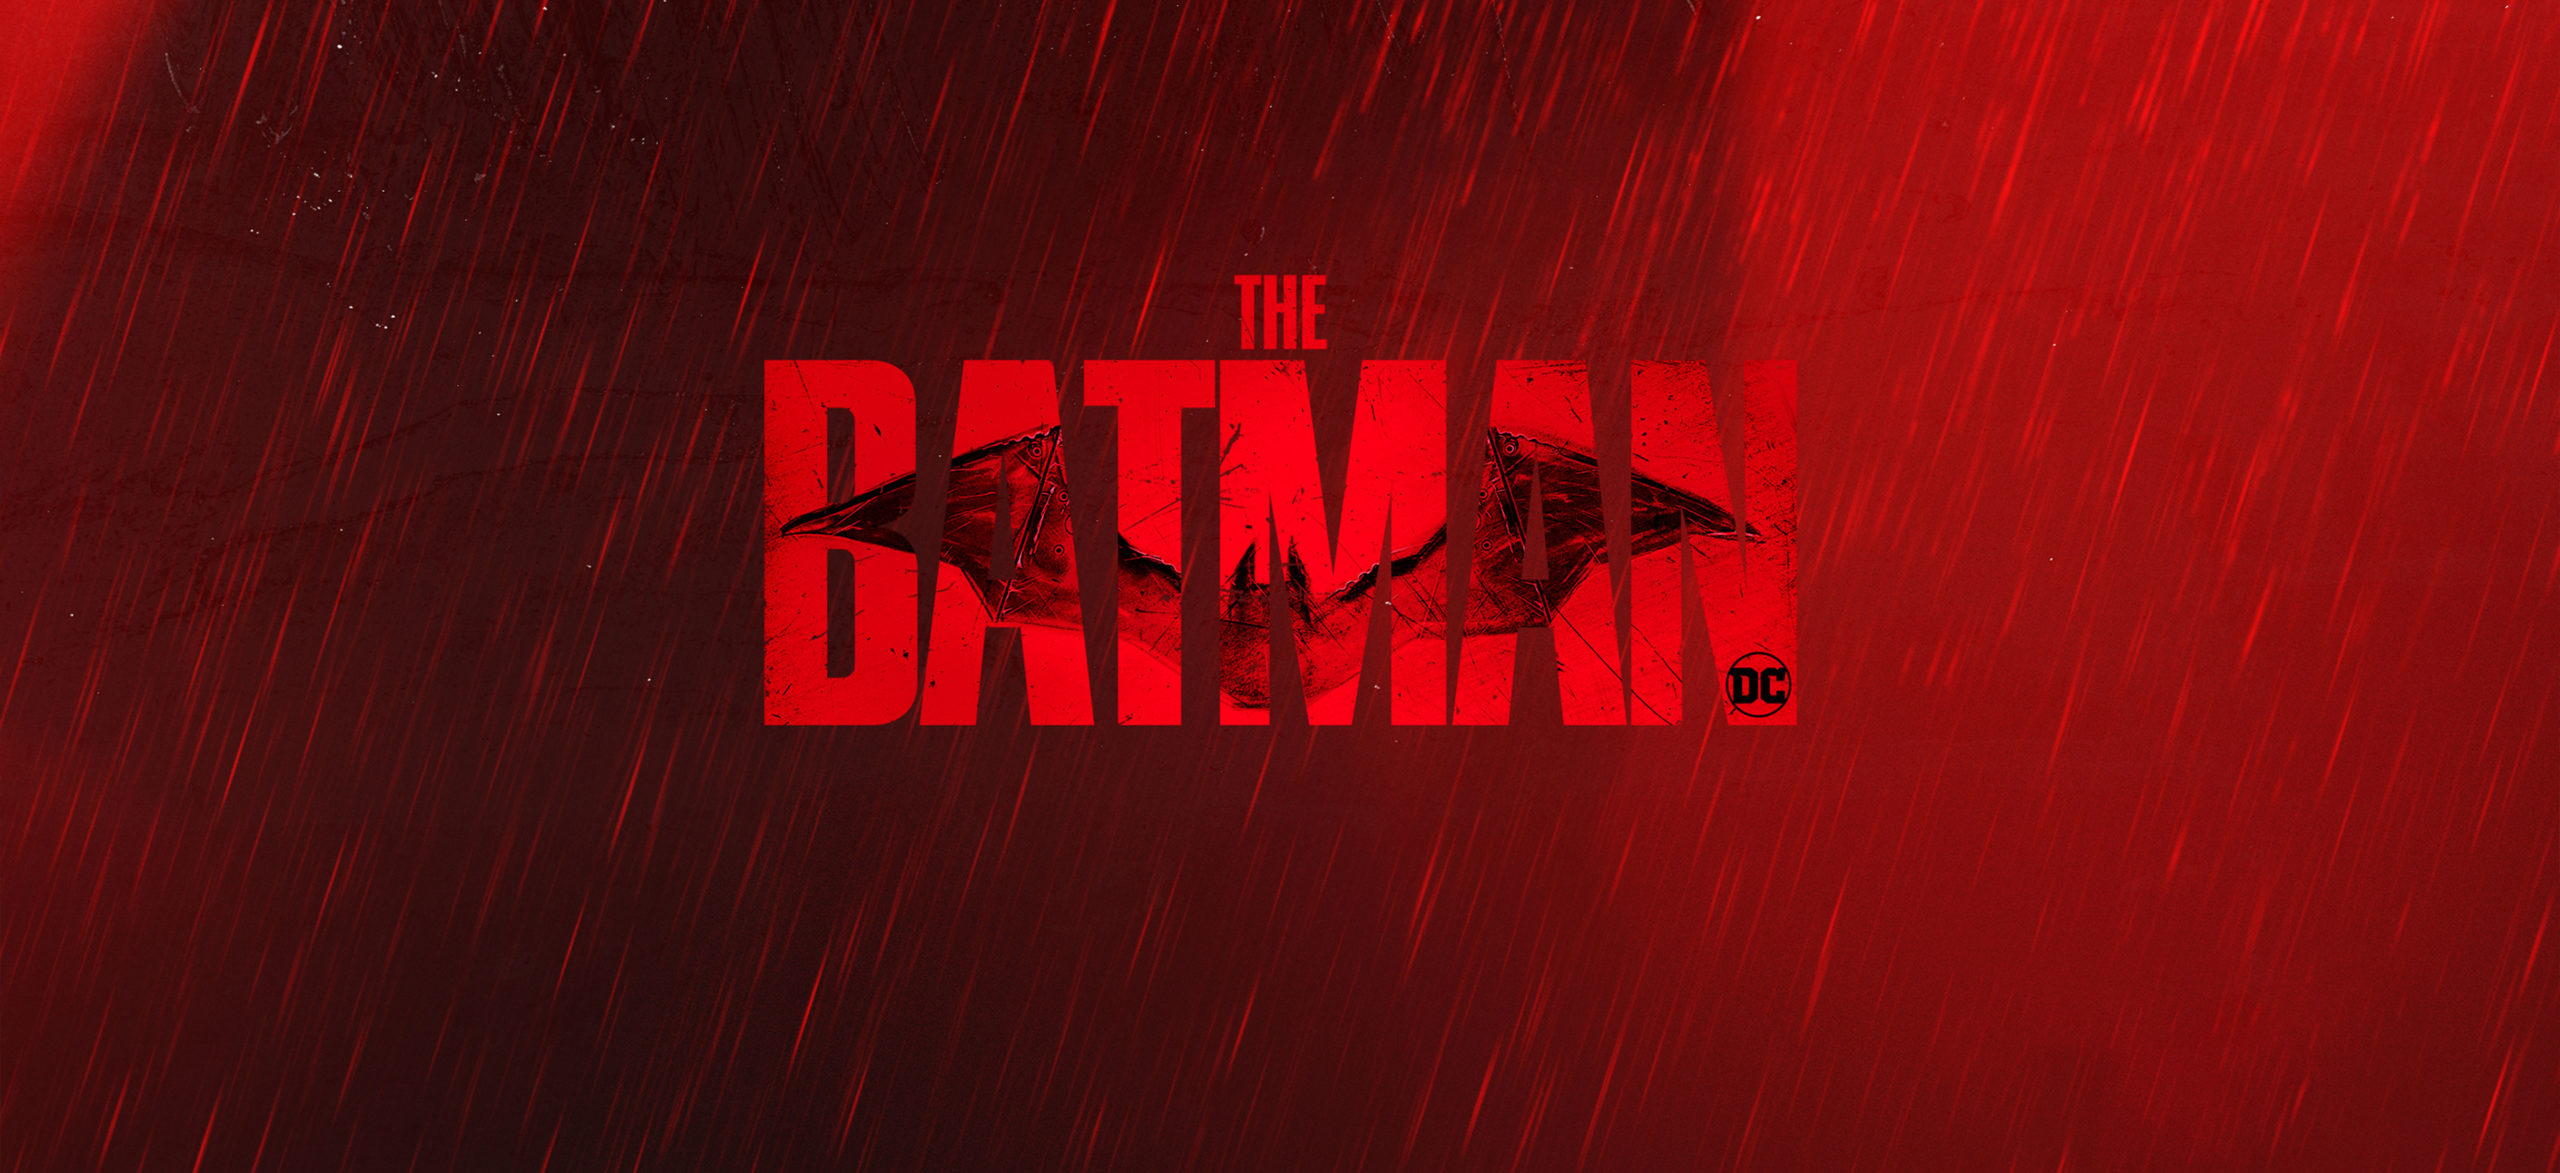 Background image for The Batman Pop-up